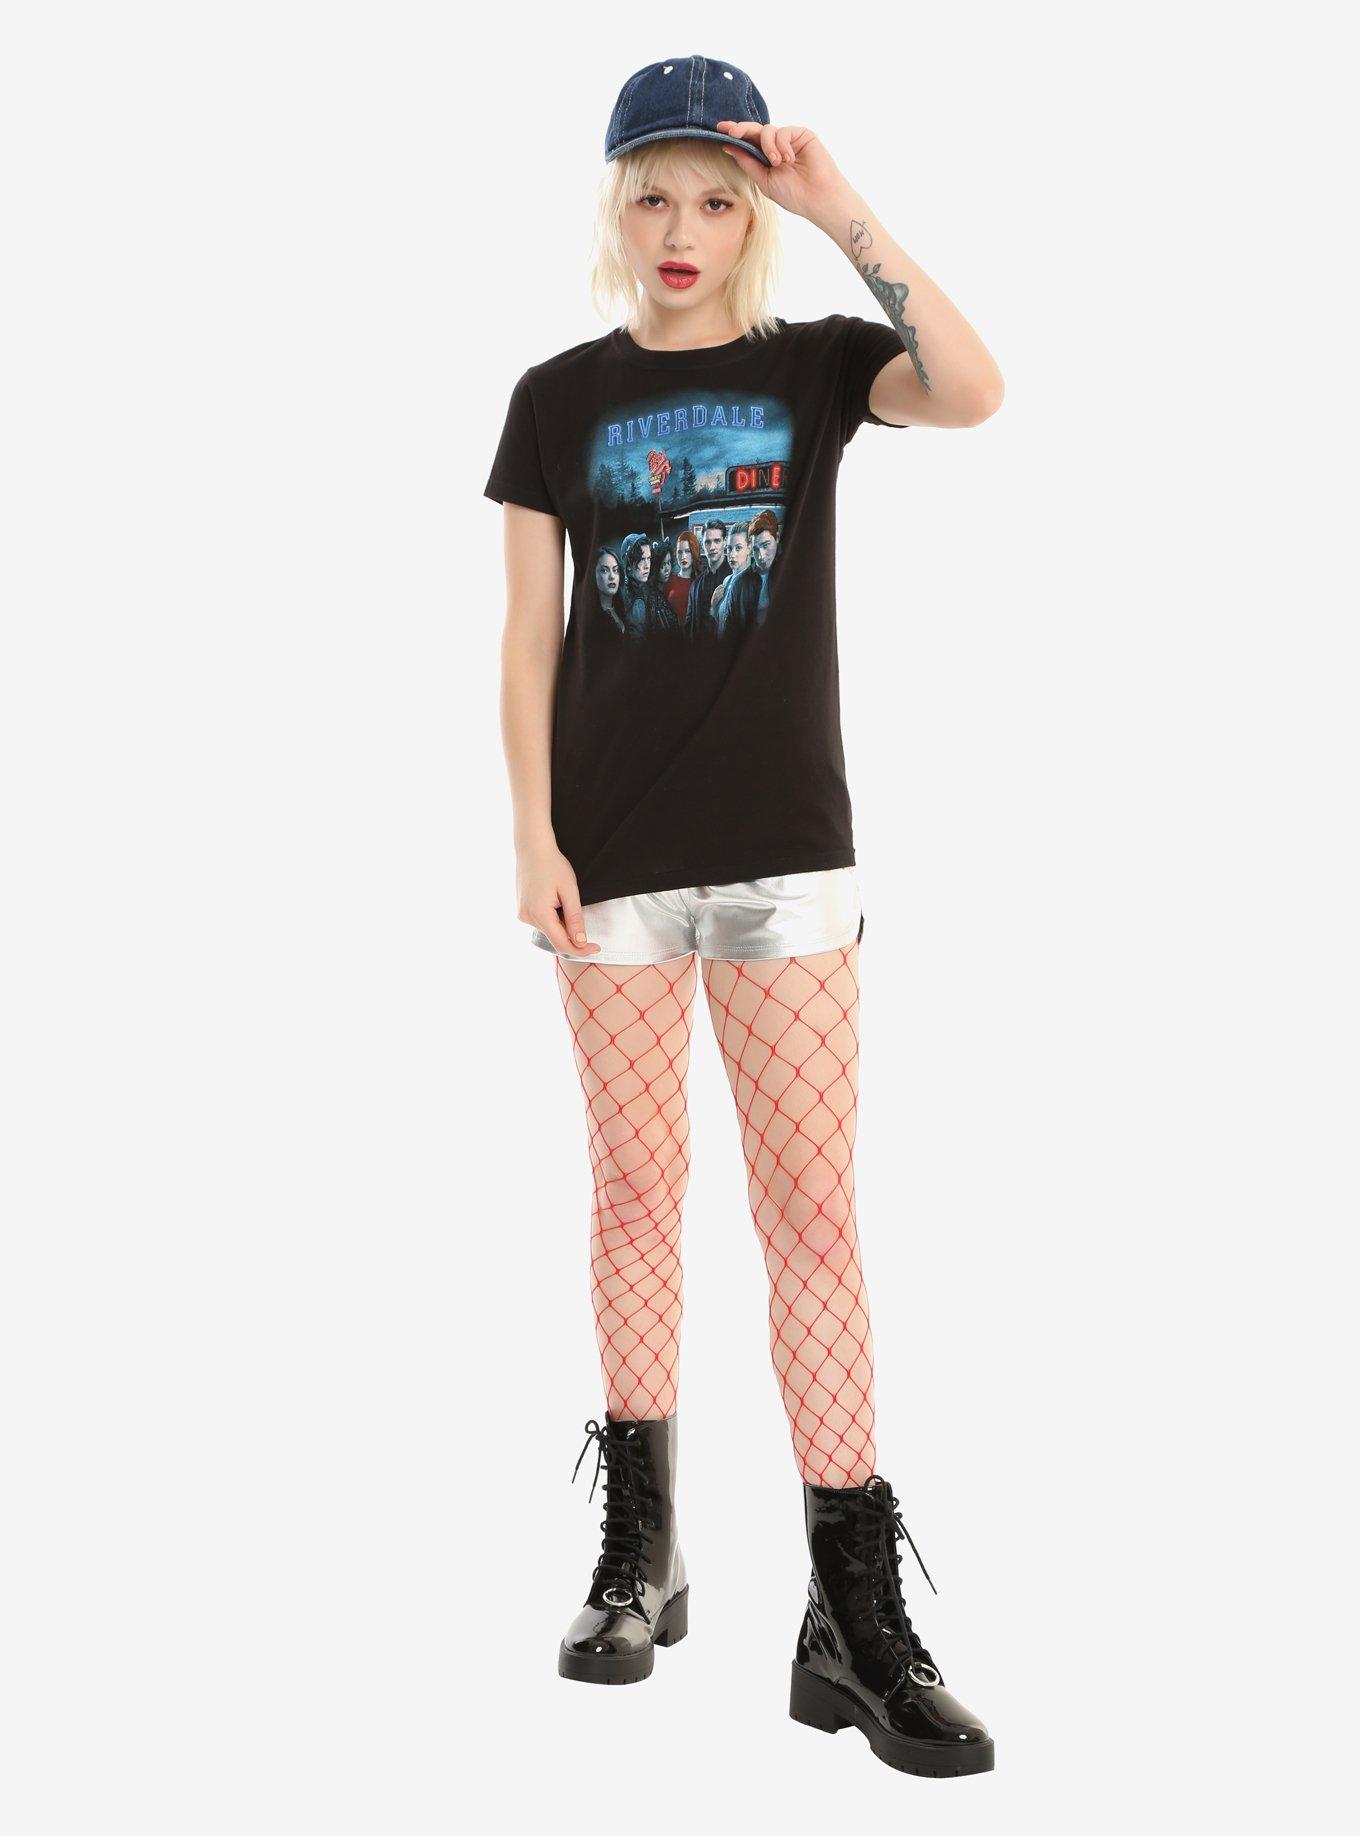 Riverdale Group Diner Girls T-Shirt Hot Topic Exclusive, , alternate